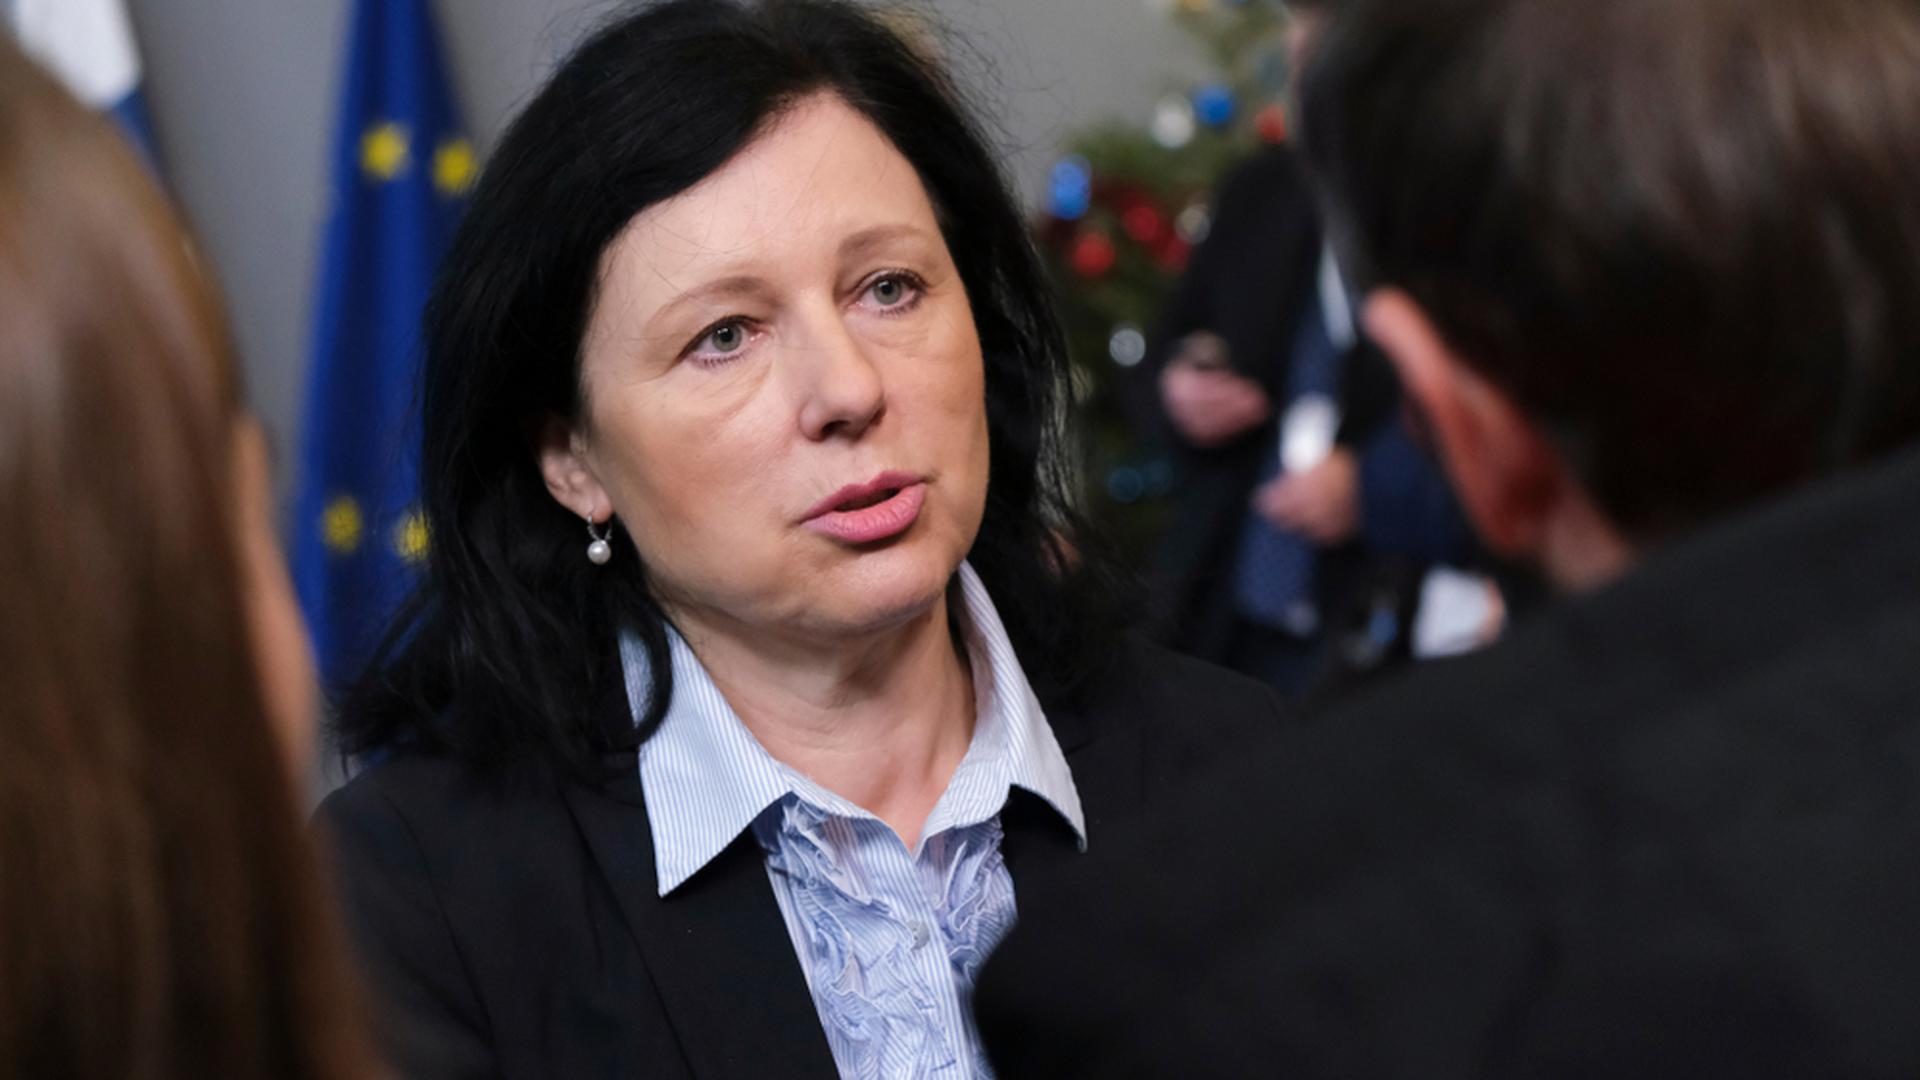 EU Commissioner Věra Jourová has warned about the potential effect of the new technologies